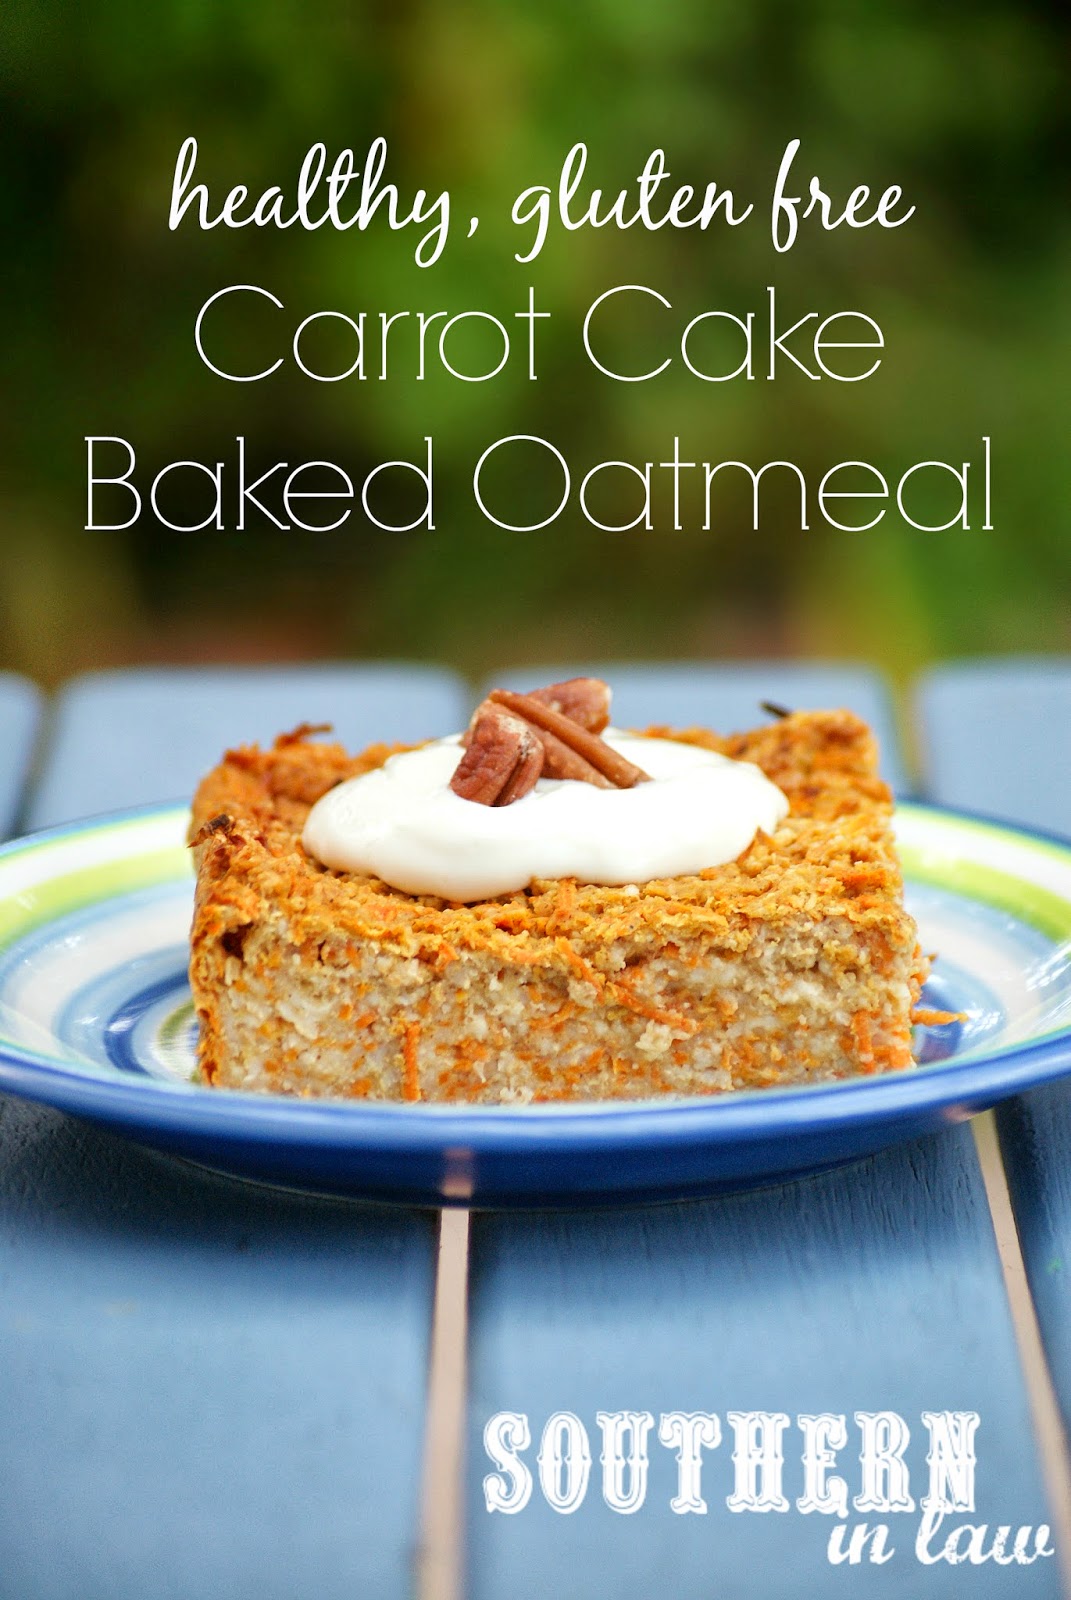 Baked Carrot Cake Oatmeal Recipe - Healthy, gluten free, low fat, sugar free, clean eating friendly